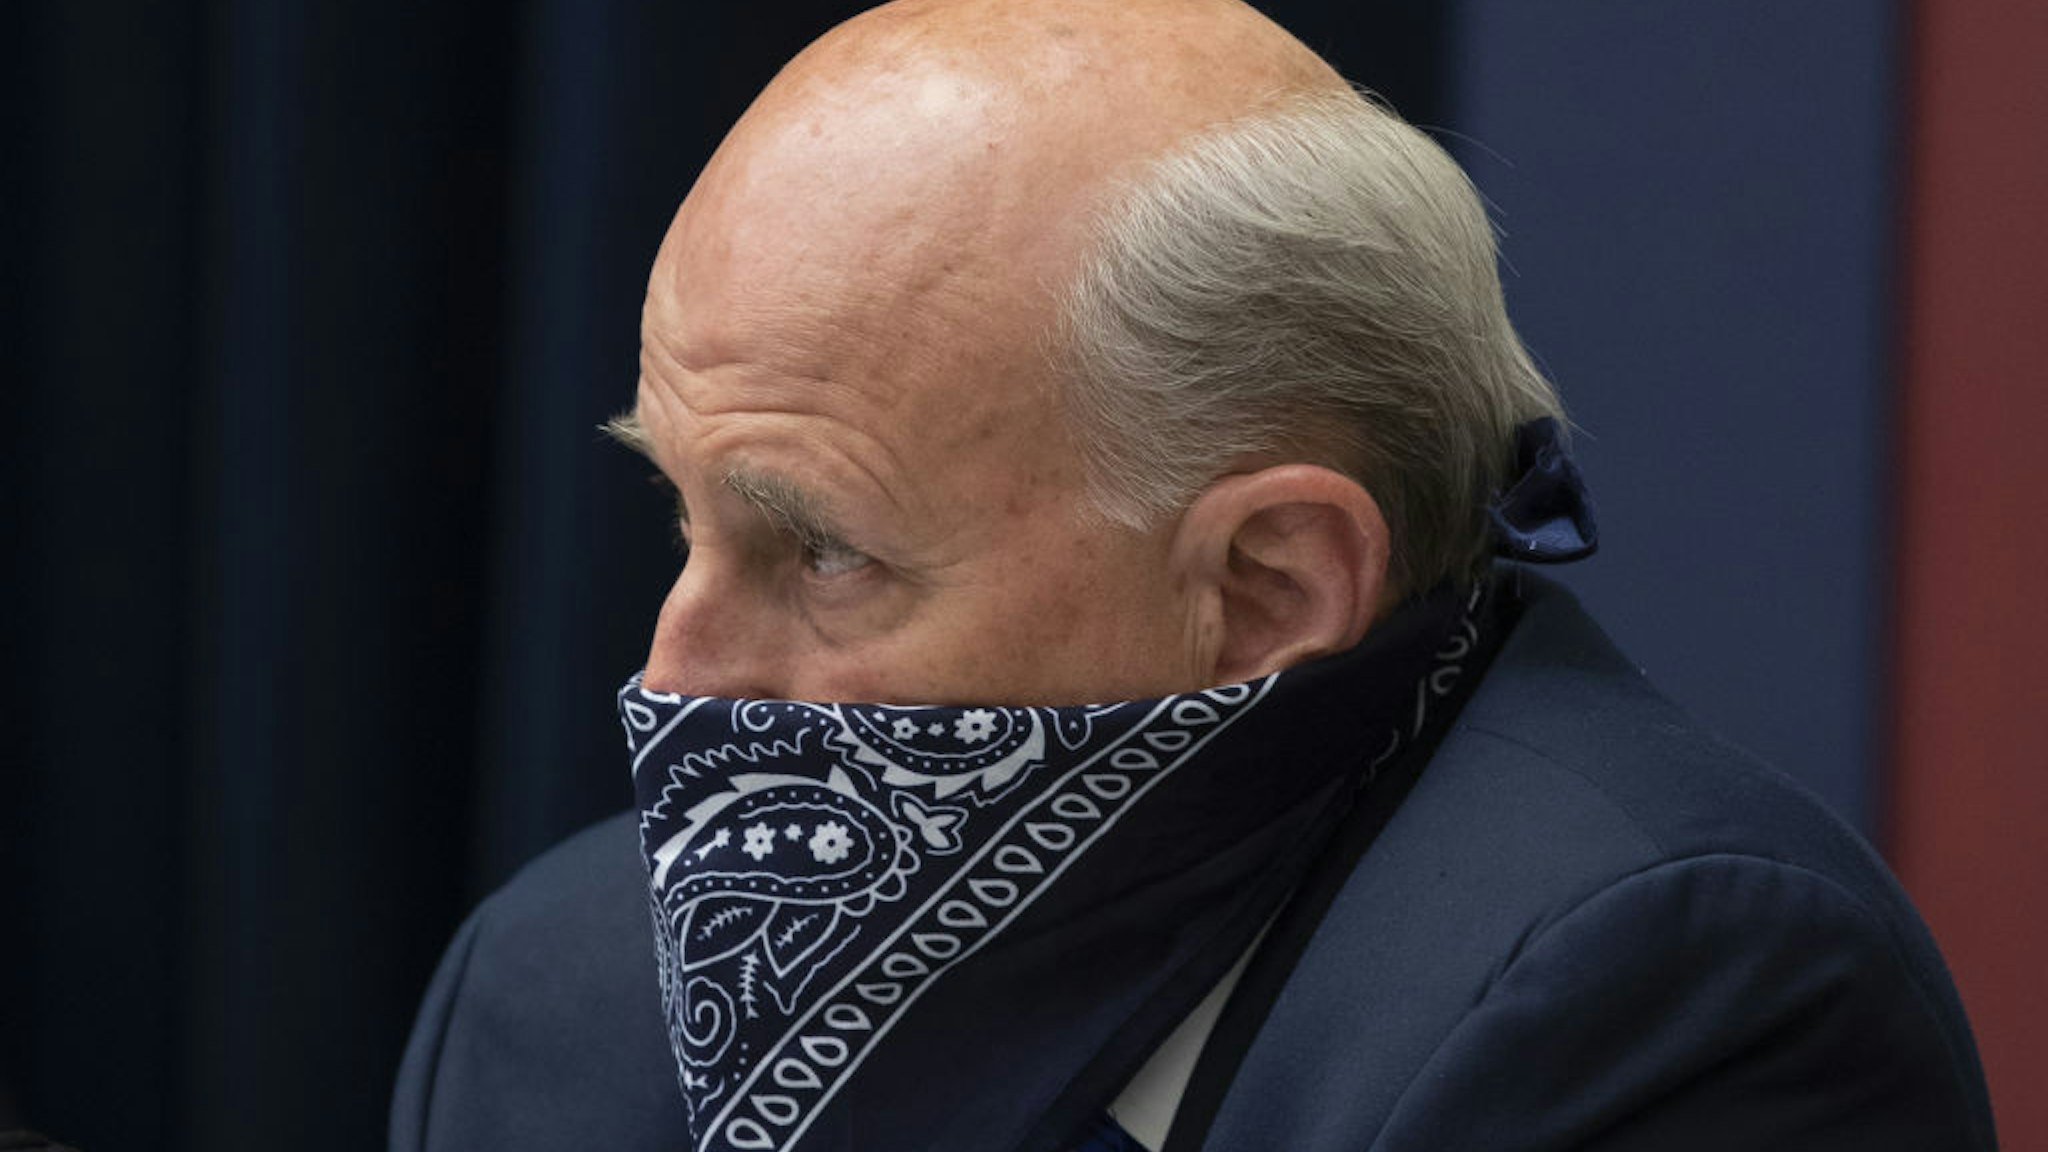 Representative Louie Gohmert, a Republican from Texas, wears a bandanna during a House Natural Resources Committee hearing in Washington, D.C., U.S., on Monday, June 29, 2020. The hearing is titled "U.S. Park Police Attack on Peaceful Protesters at Lafayette Square Park." Photographer: Michael Reynolds/EPA/Bloomberg via Getty Images